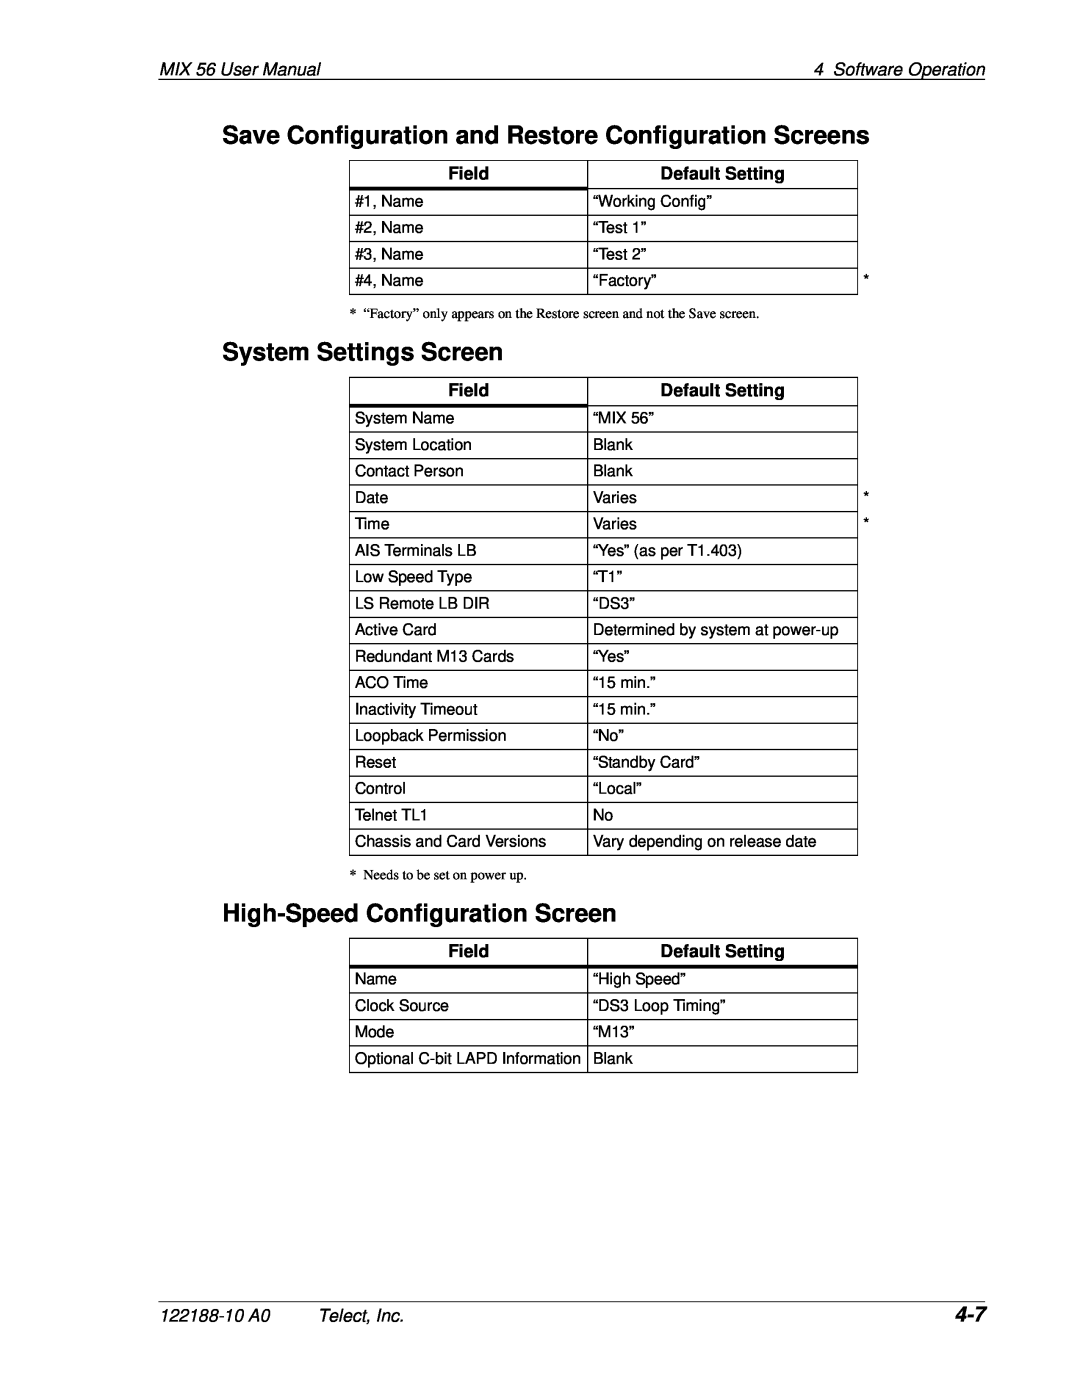 Telect Save Configuration and Restore Configuration Screens, System Settings Screen, MIX 56 User Manual, Field 